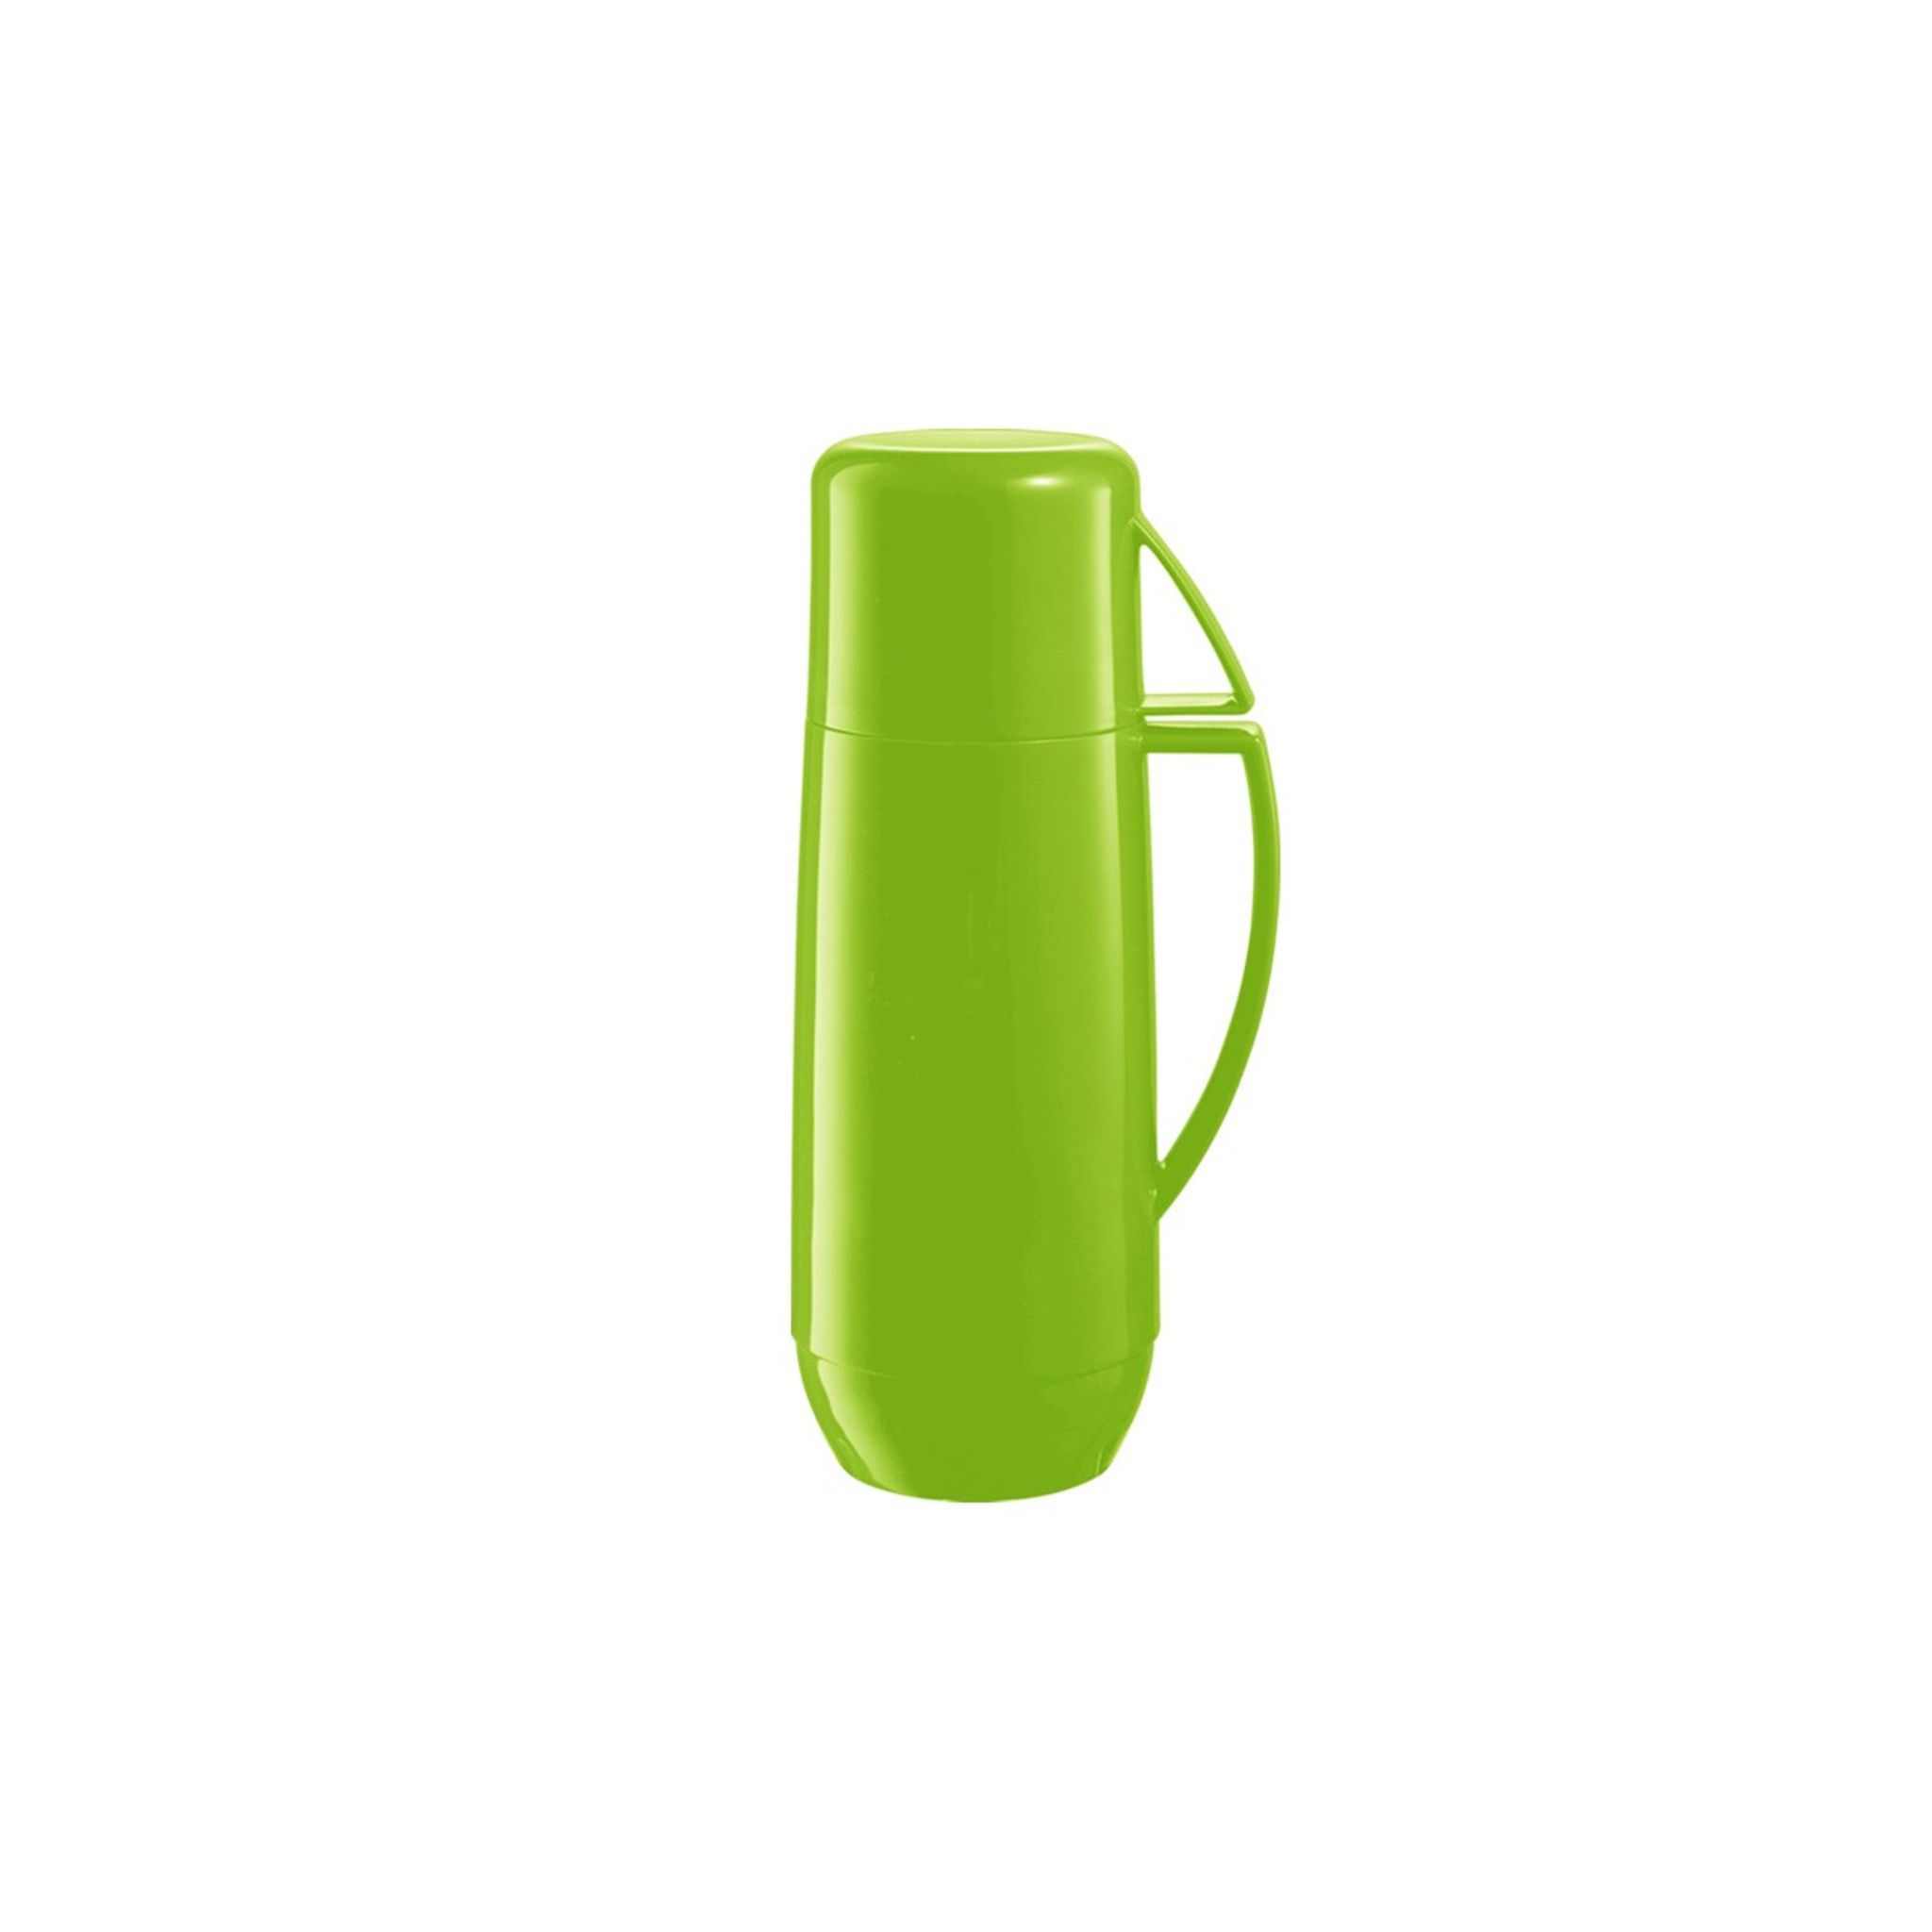 Vacuum flask with cup FAMILY COLORI 0.15 l, green